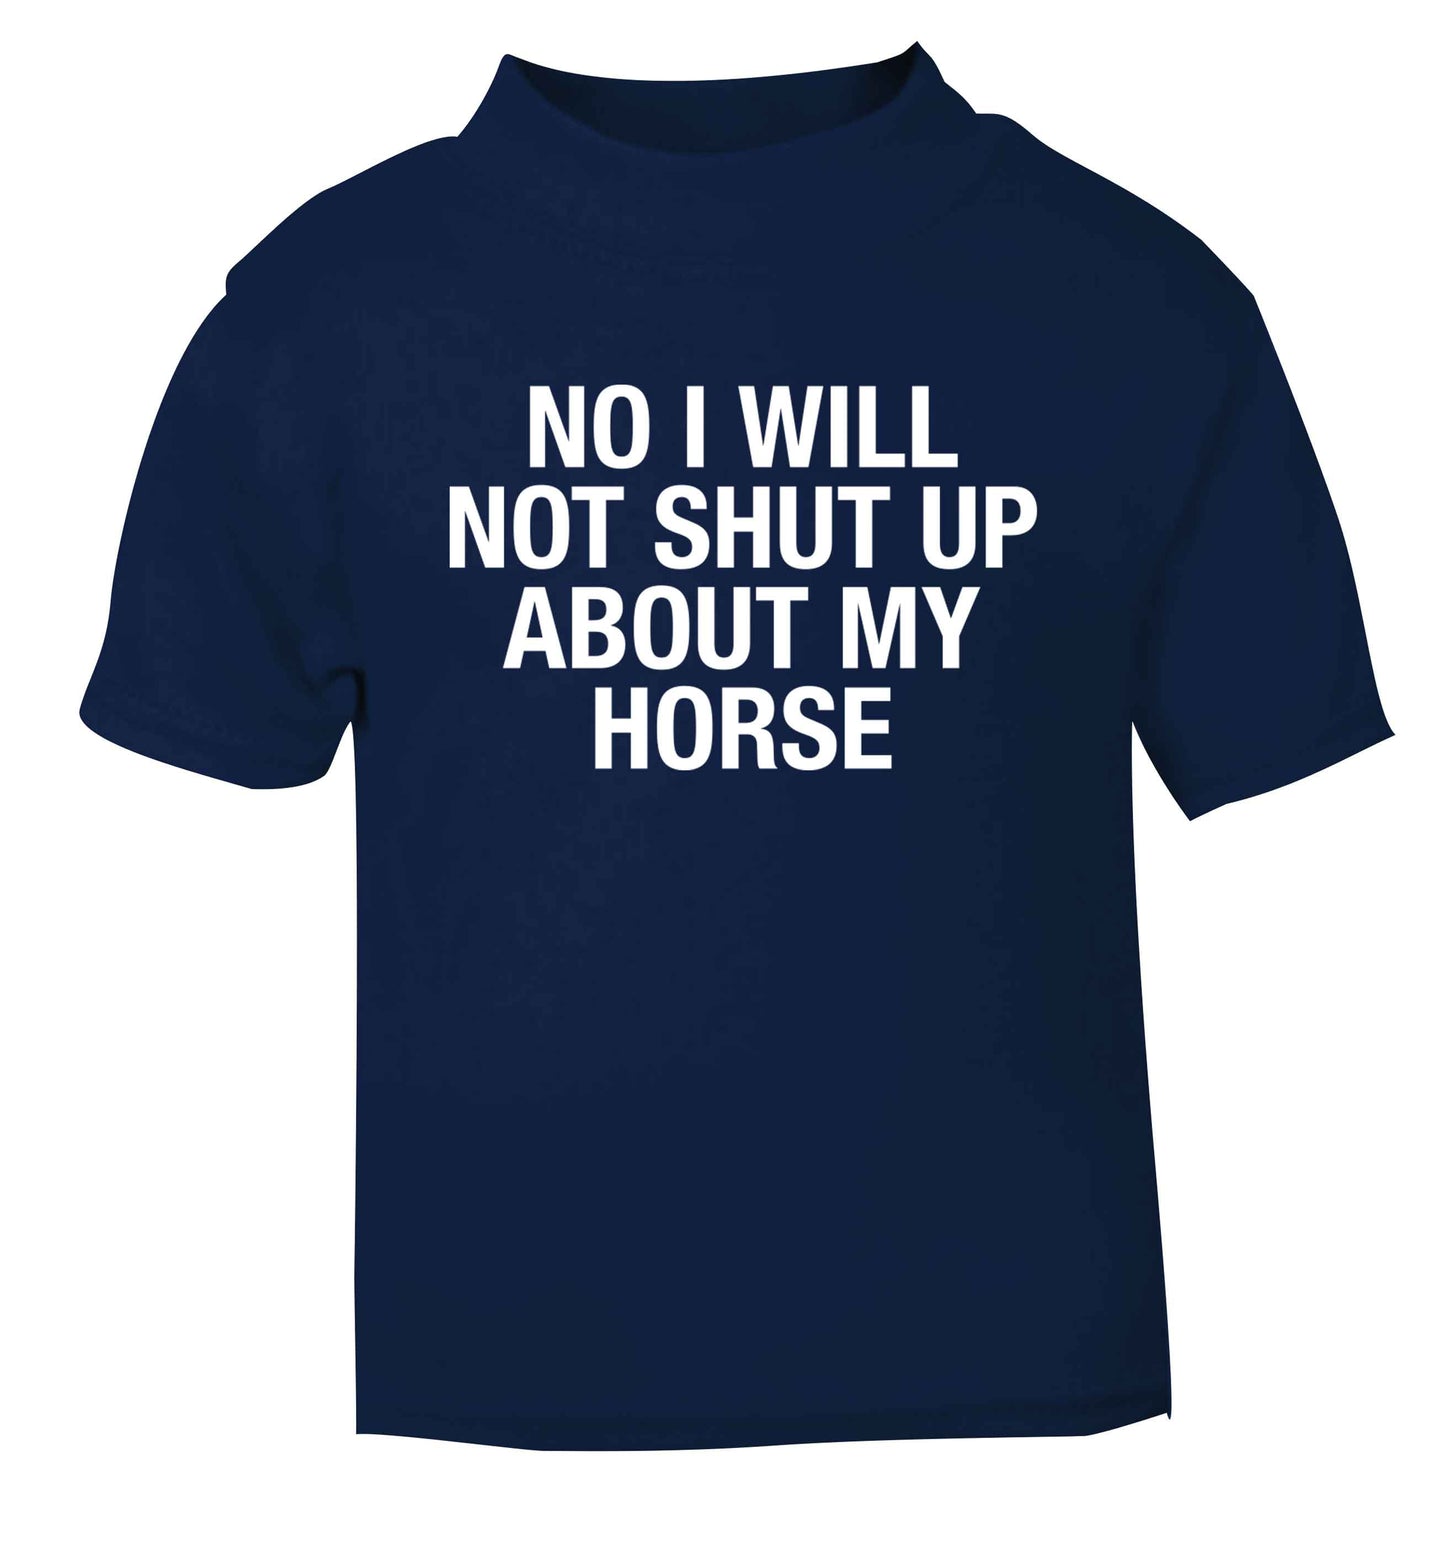 No I will not shut up talking about my horse navy baby toddler Tshirt 2 Years